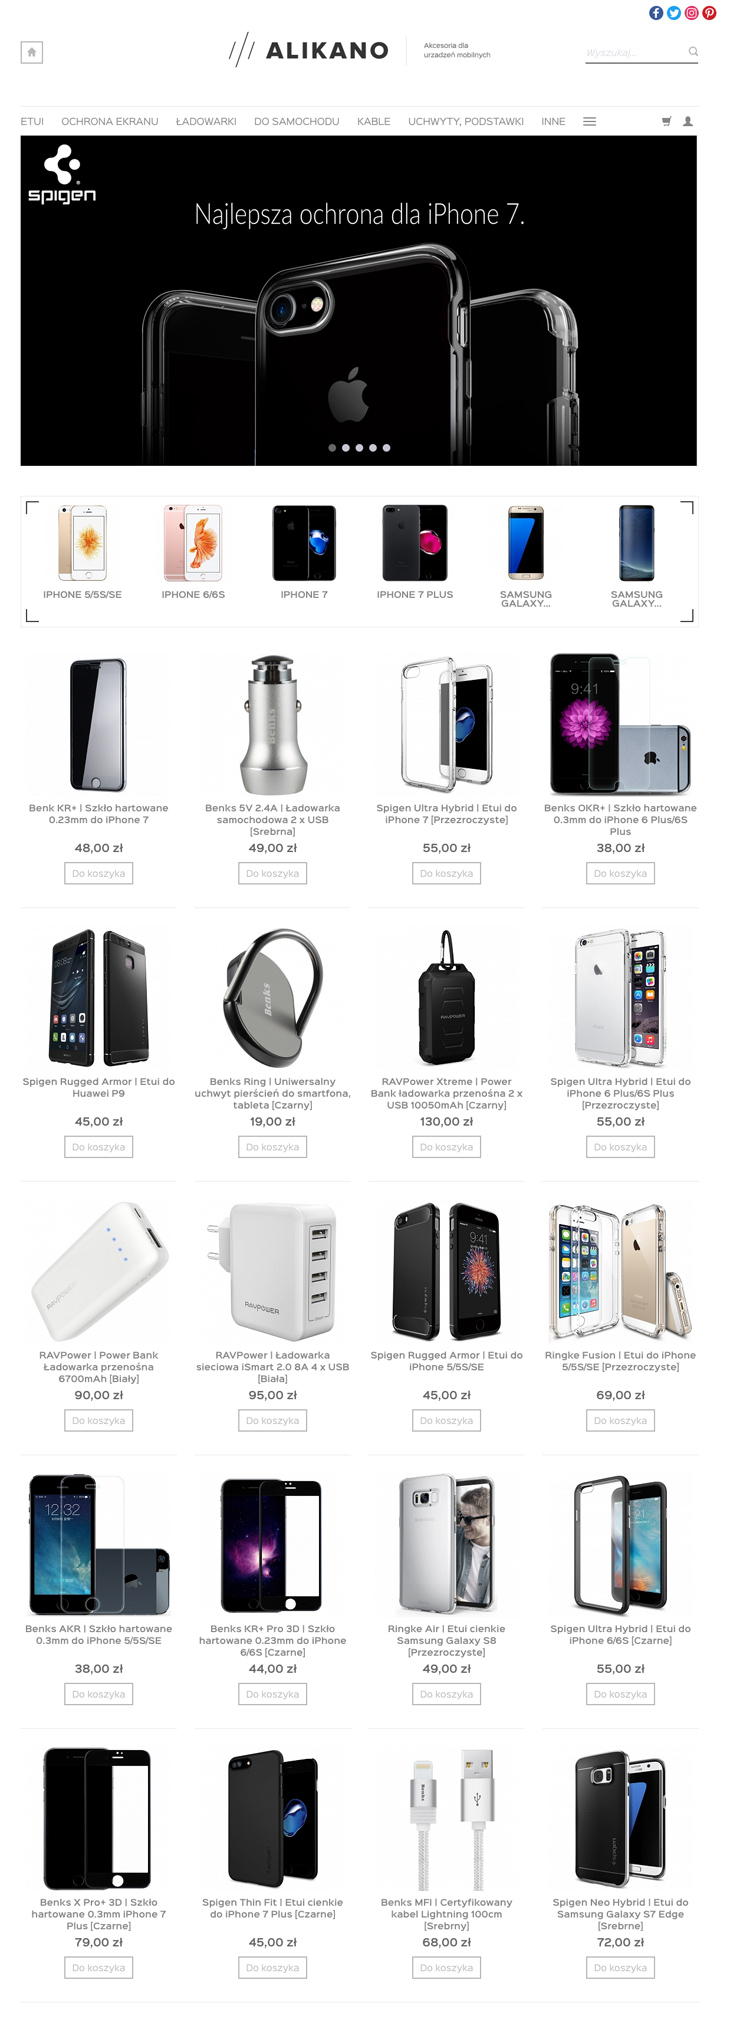 ALIKANO Online Store Accessories for Mobile Devices